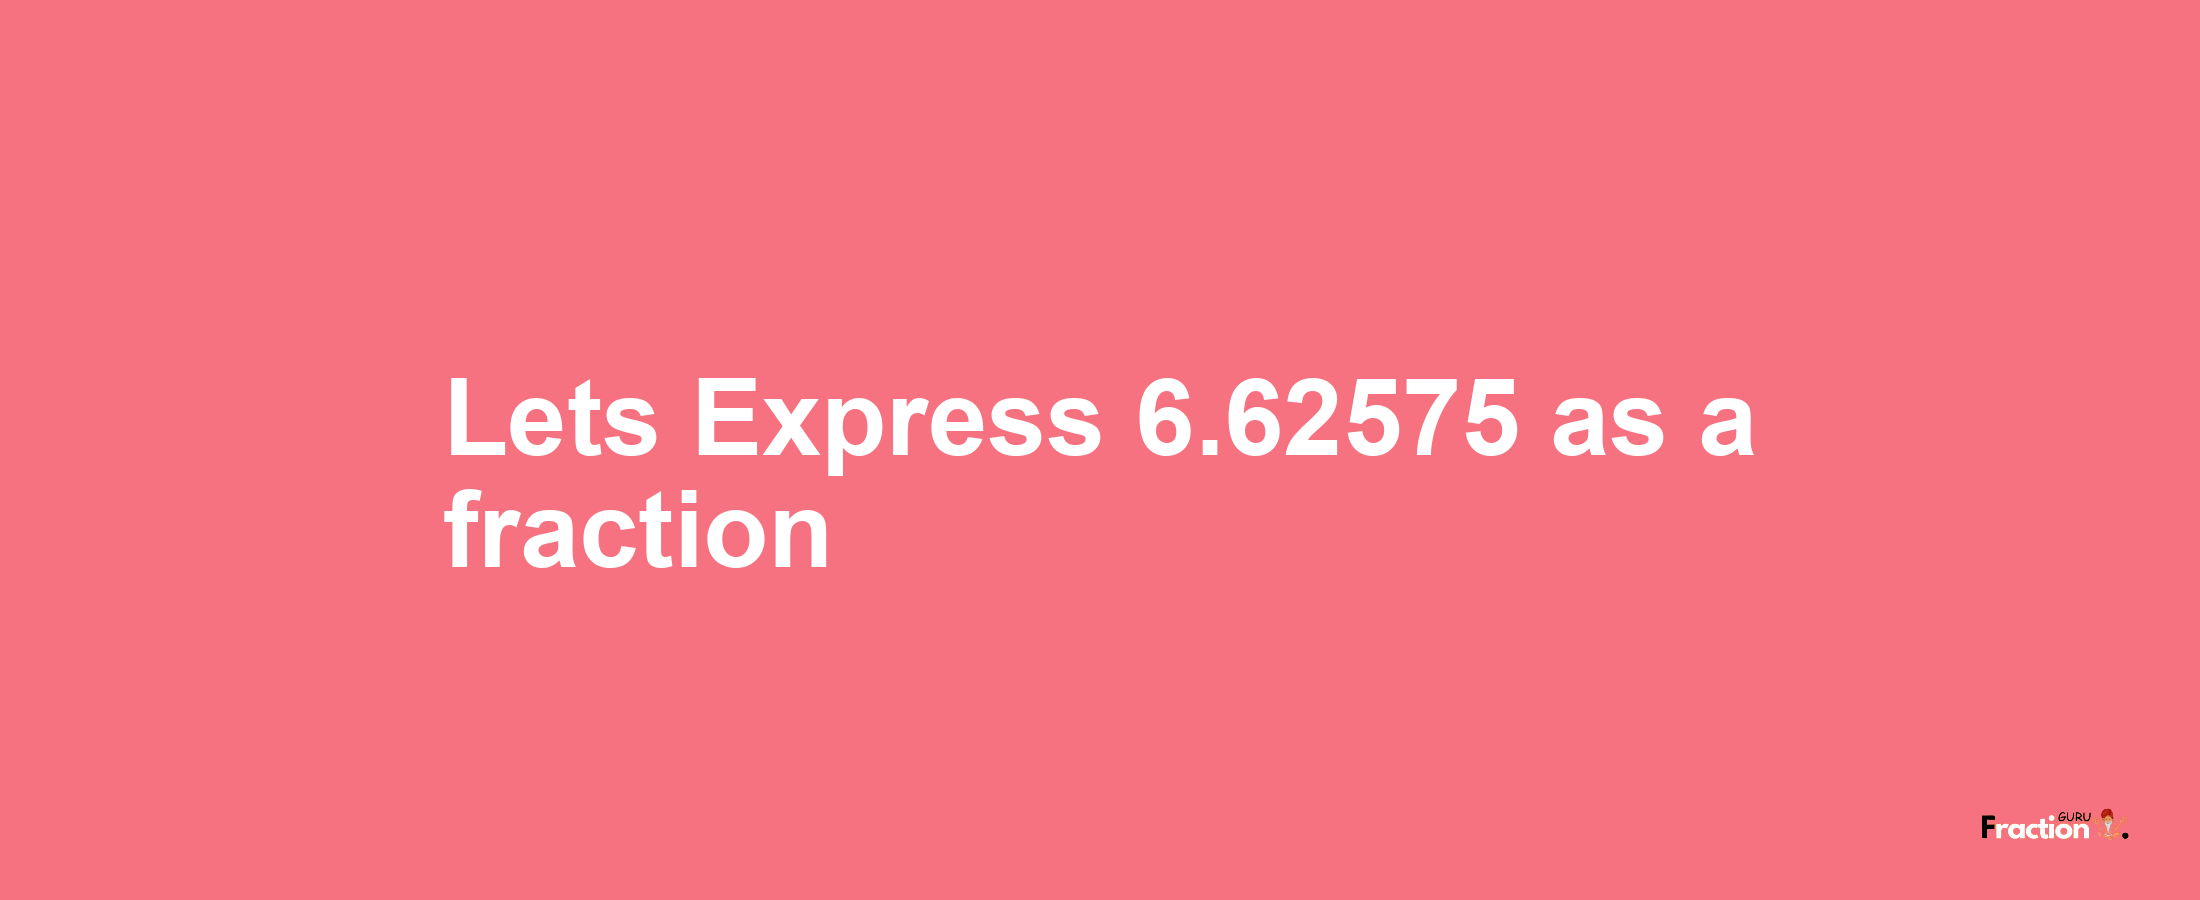 Lets Express 6.62575 as afraction